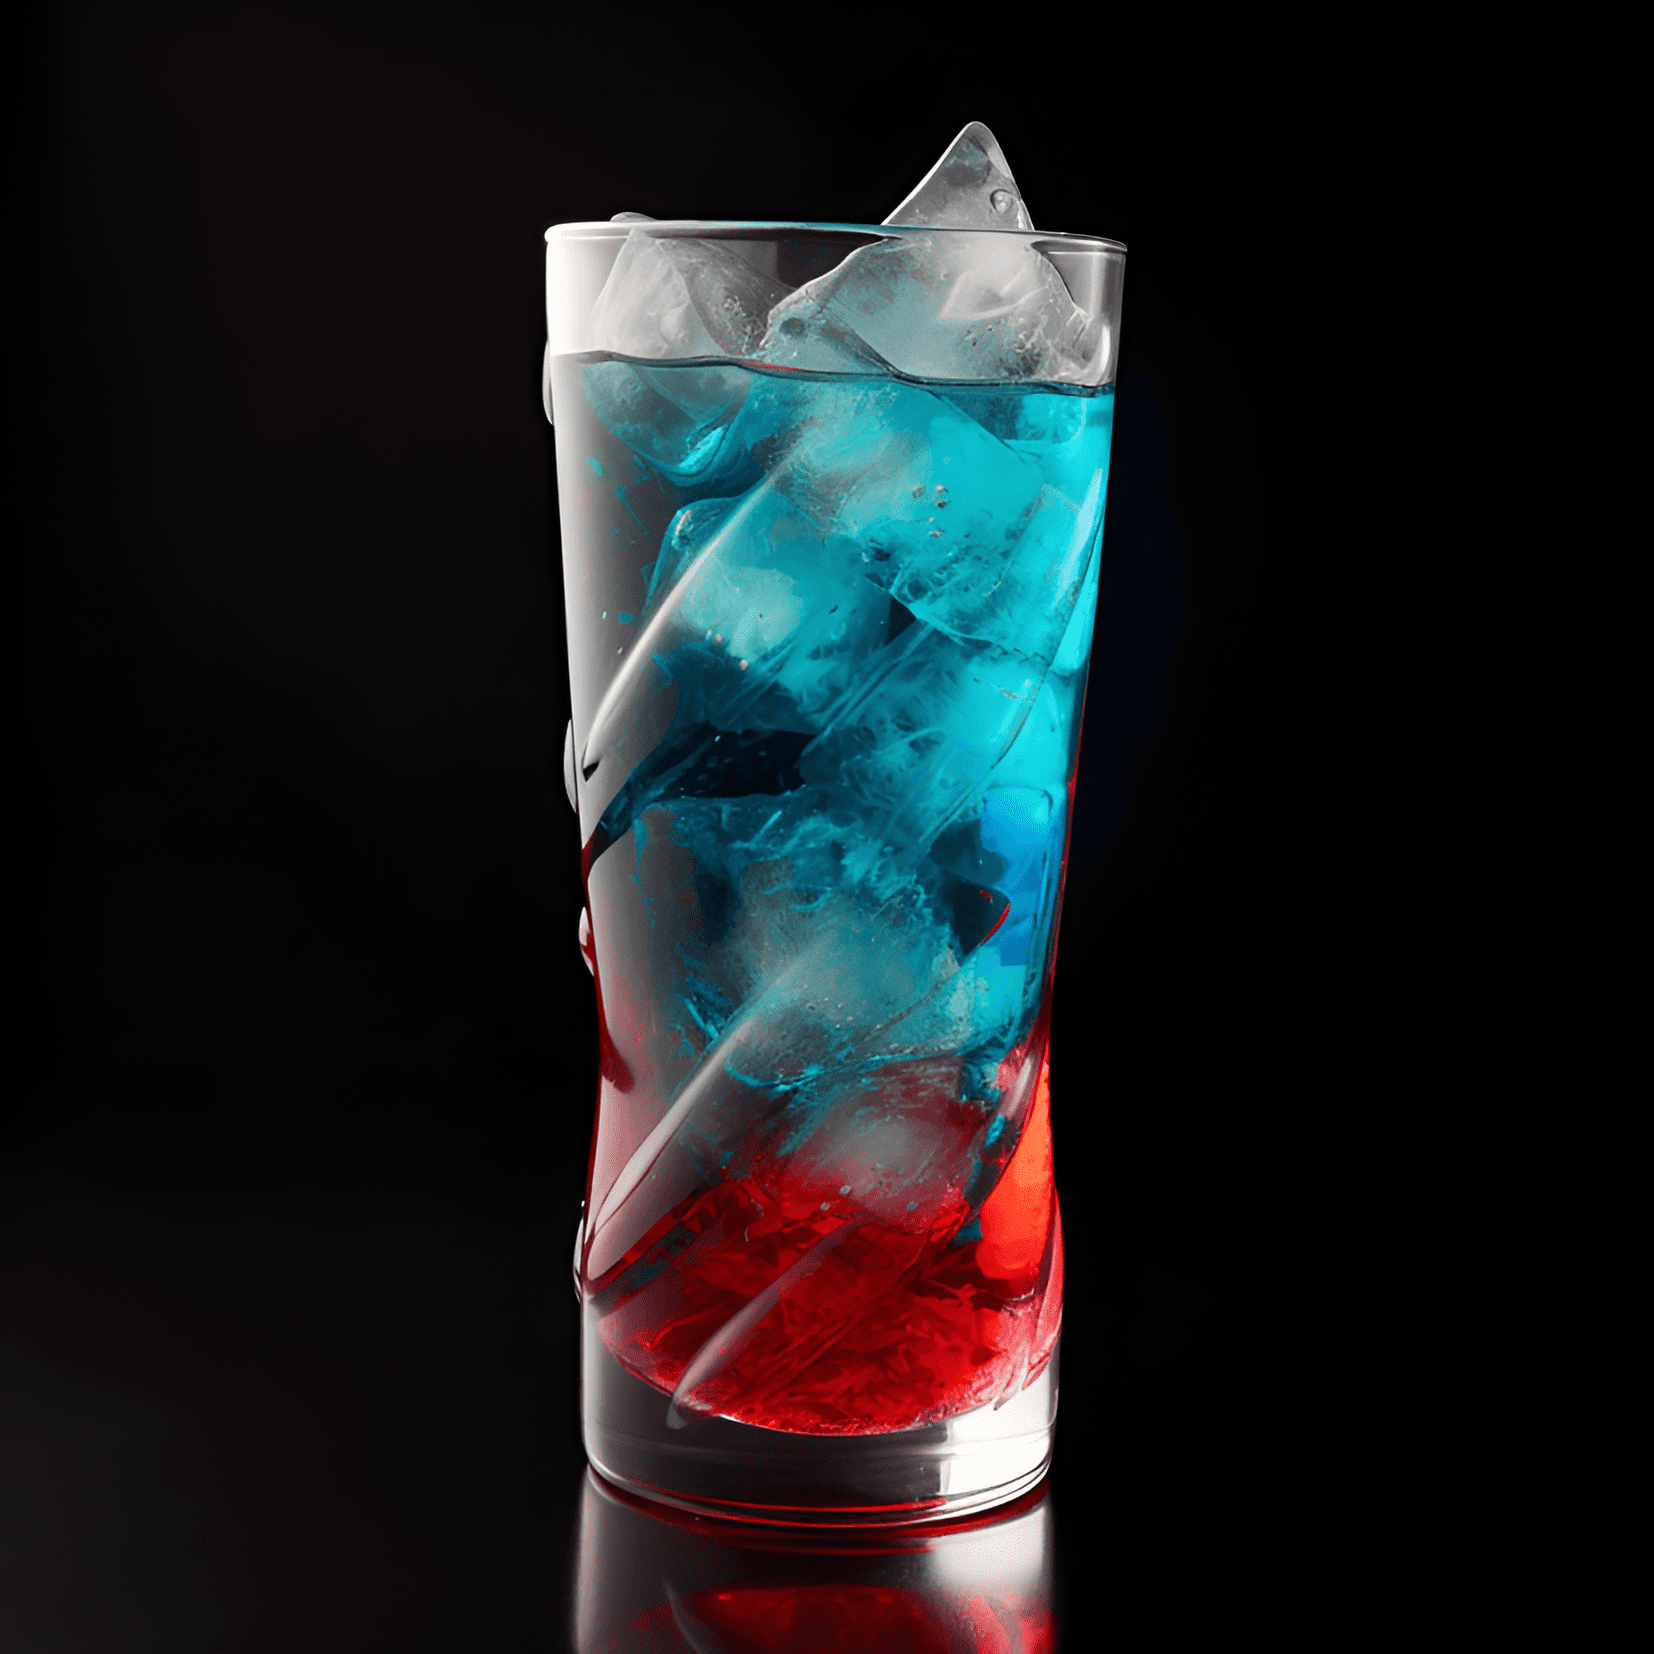 The Shark Bite cocktail offers a delightful combination of sweet, sour, and fruity flavors. The orange and pineapple juices provide a tropical sweetness, while the sour mix adds a tangy twist. The blue curaçao gives the drink its signature ocean blue color and a hint of citrus, while the spiced rum adds warmth and depth.